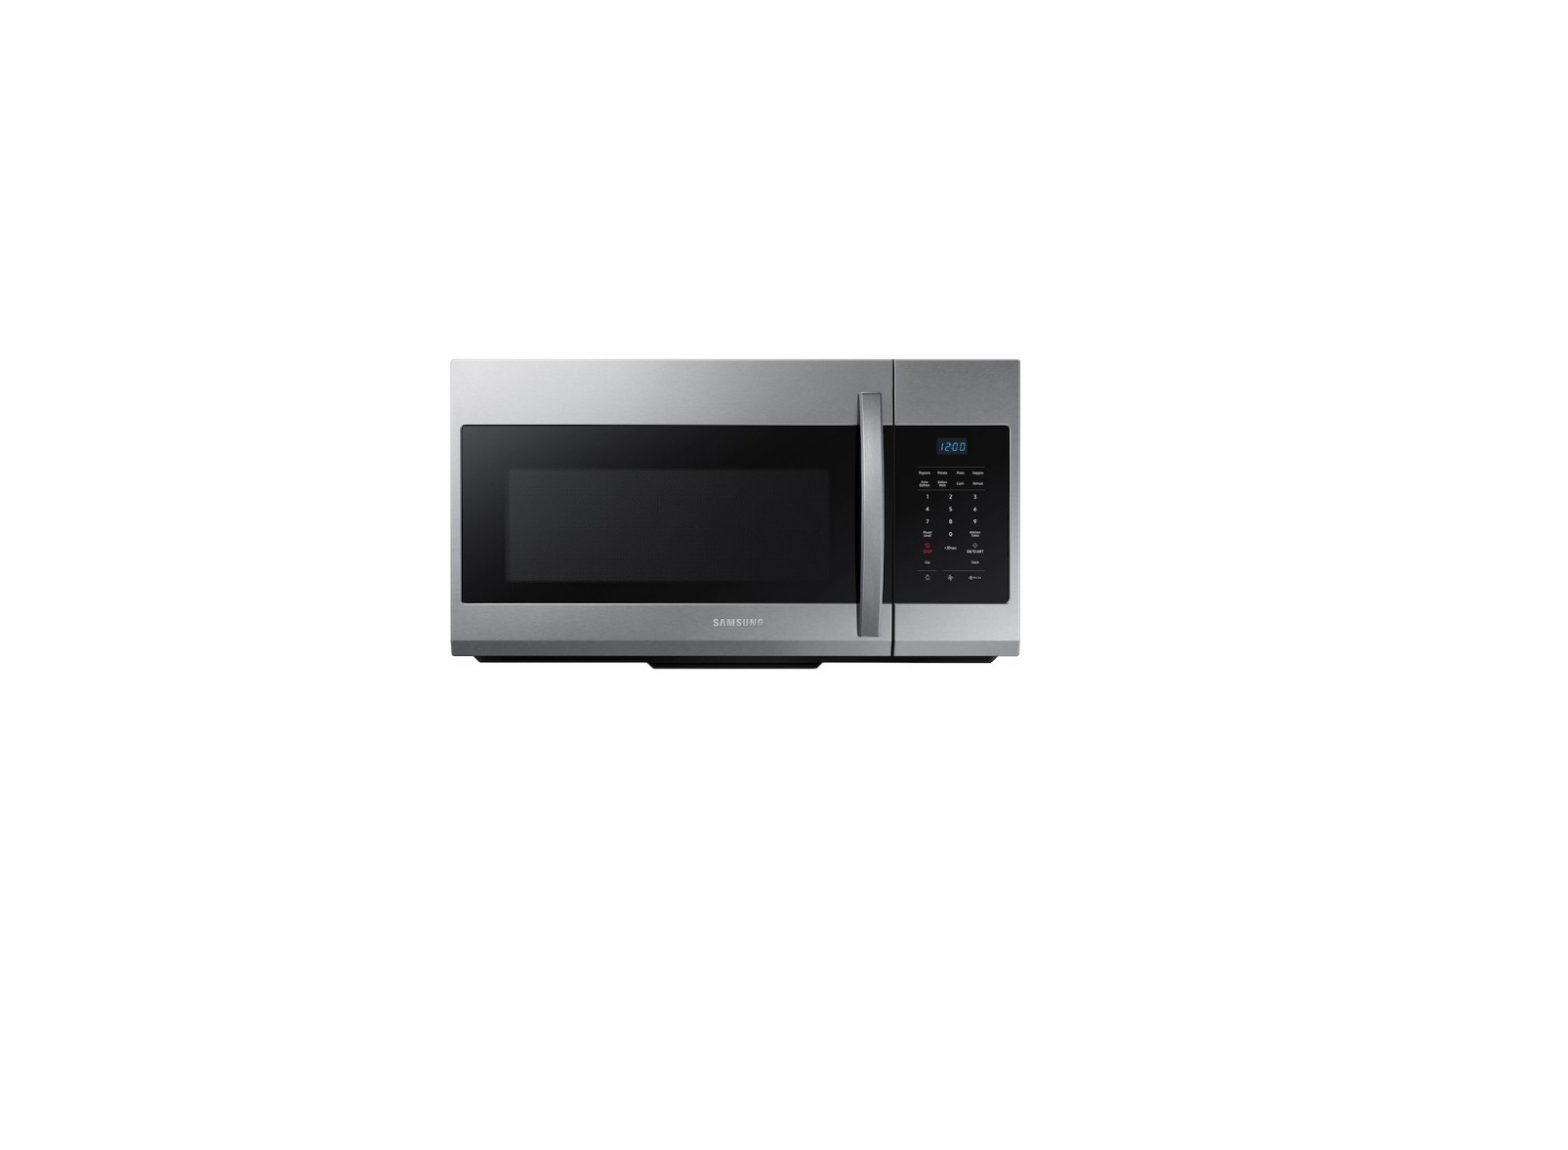 SAMSUNG The Range Microwave Oven Instruction Manual